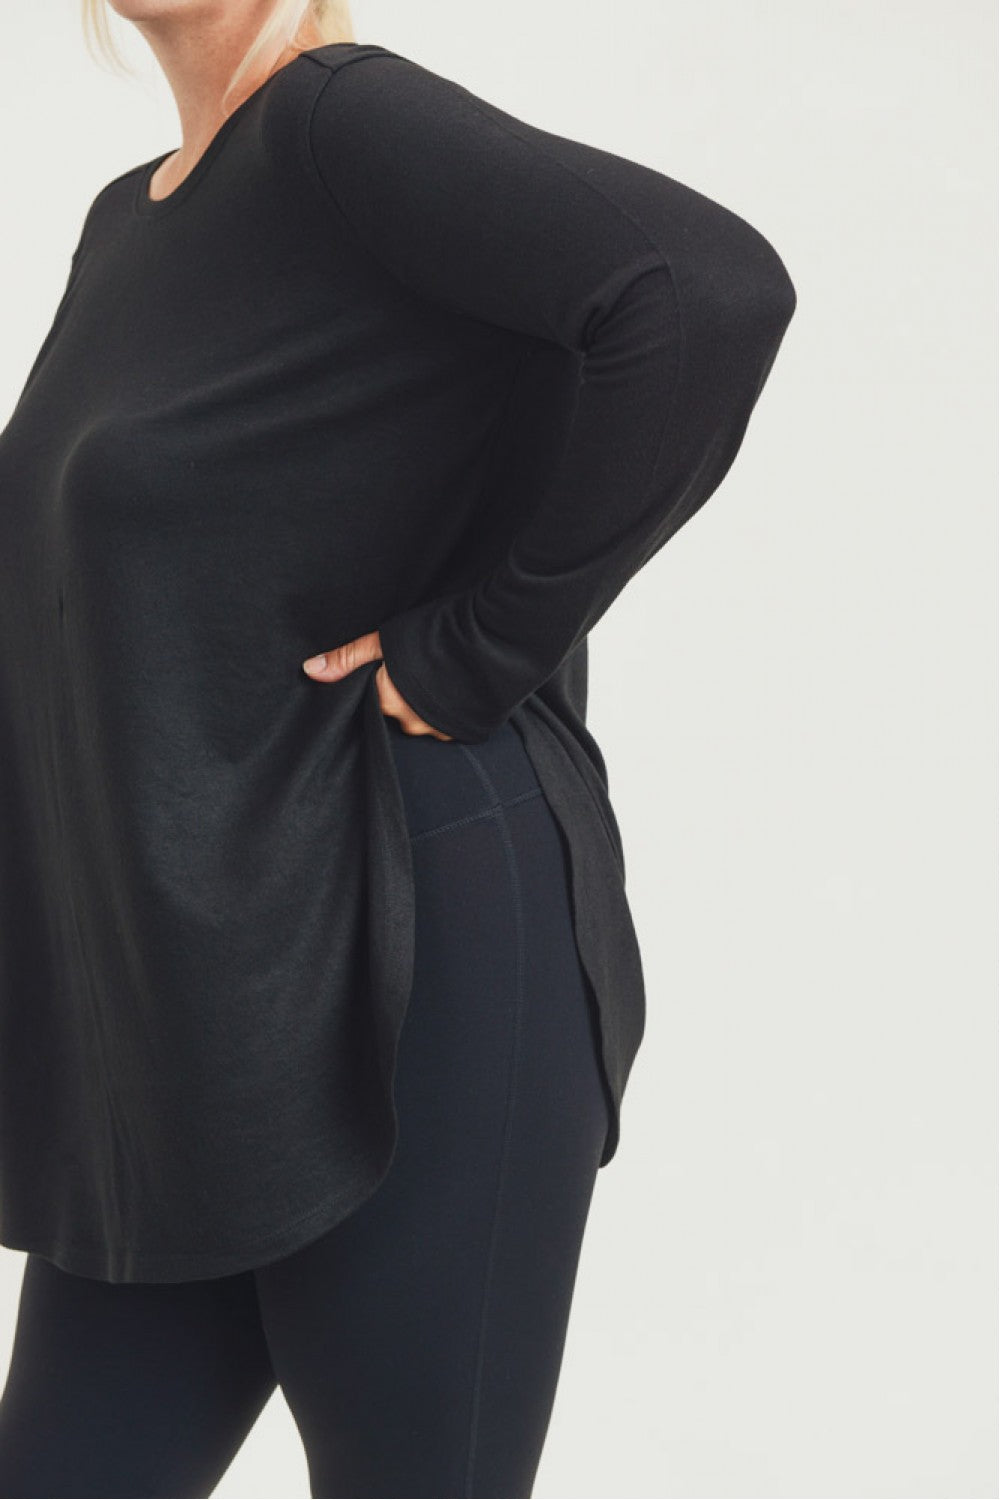 Black Long Sleeve Flow Top with Side Slits